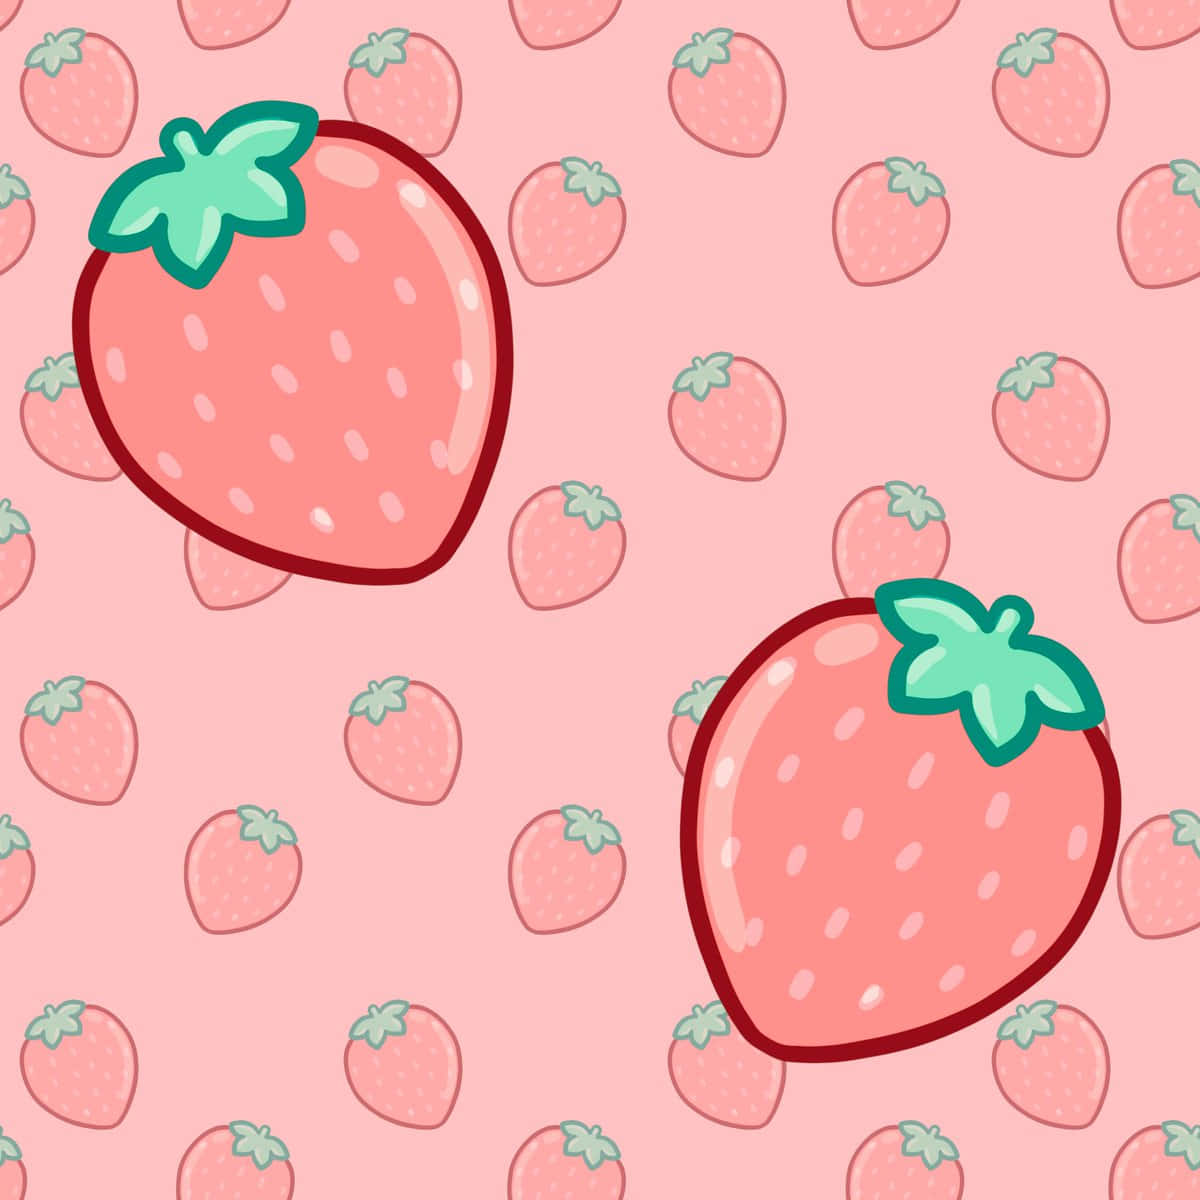 "A lovely pastel-colored strawberry to brighten your day" Wallpaper